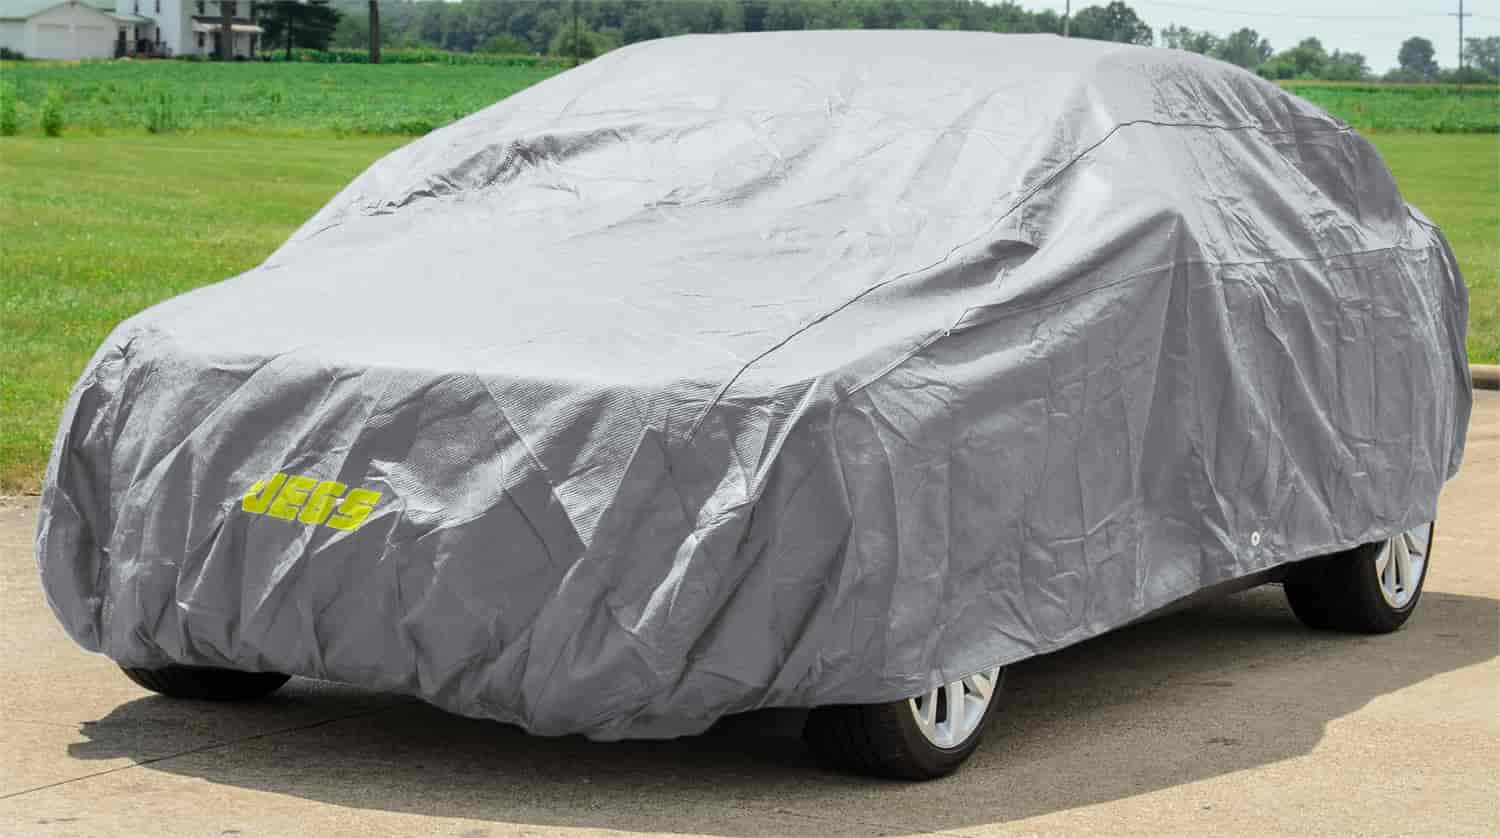 Car Cover Large